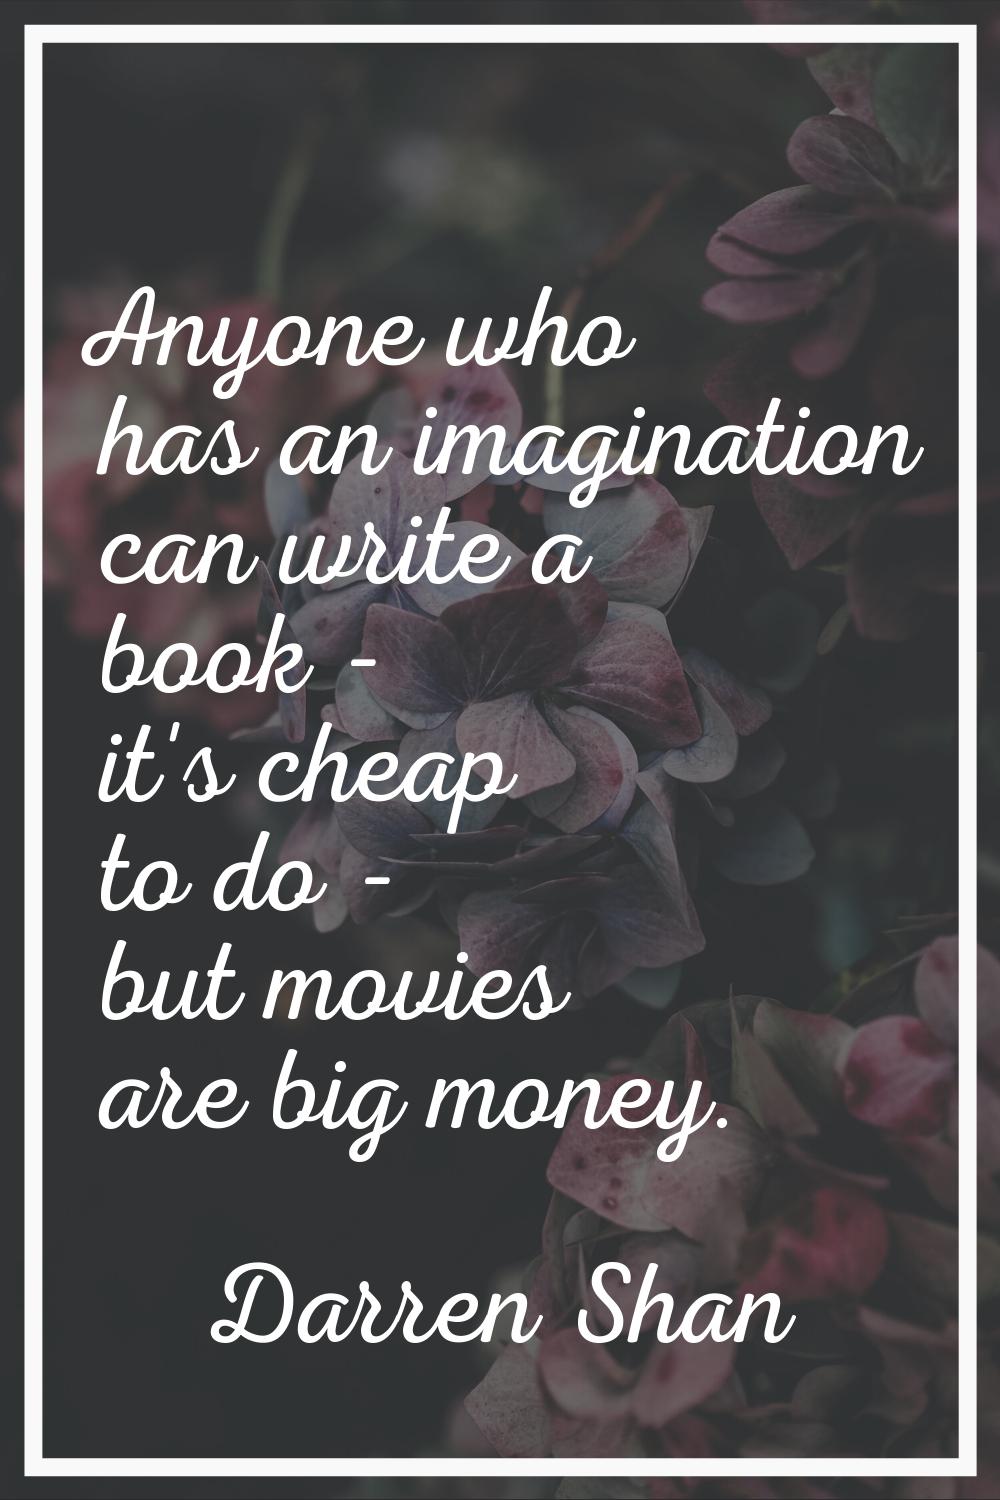 Anyone who has an imagination can write a book - it's cheap to do - but movies are big money.